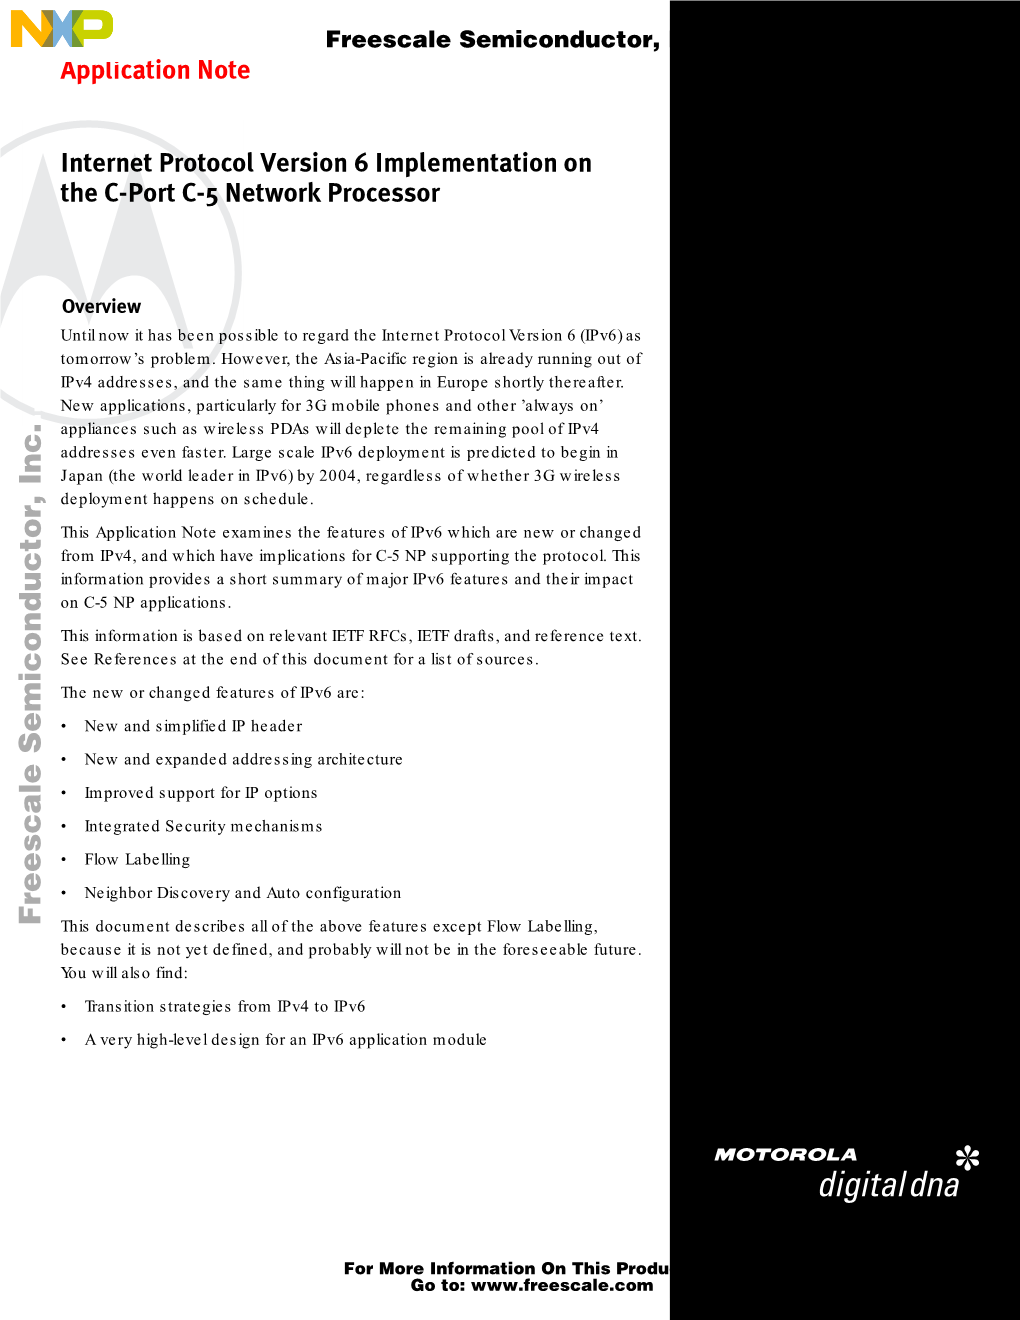 Application Note: Ipv6 Implementation